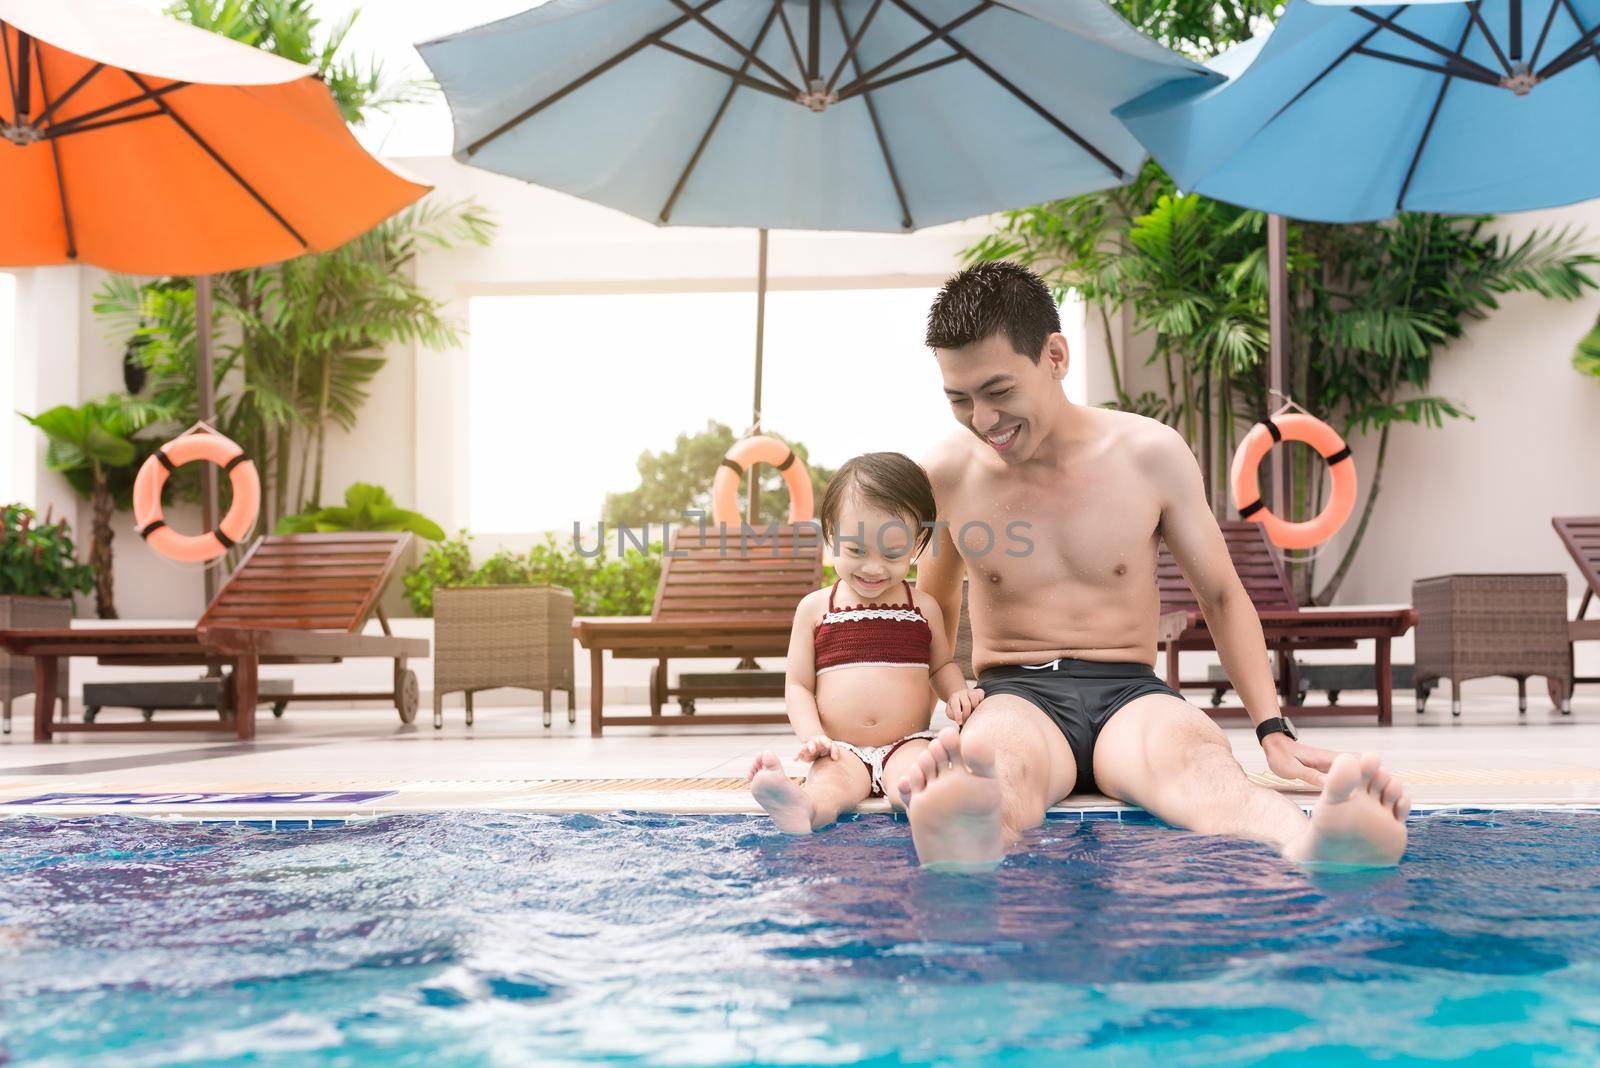 Father and daughter having fun in the pool. Summer holidays and vacation concept